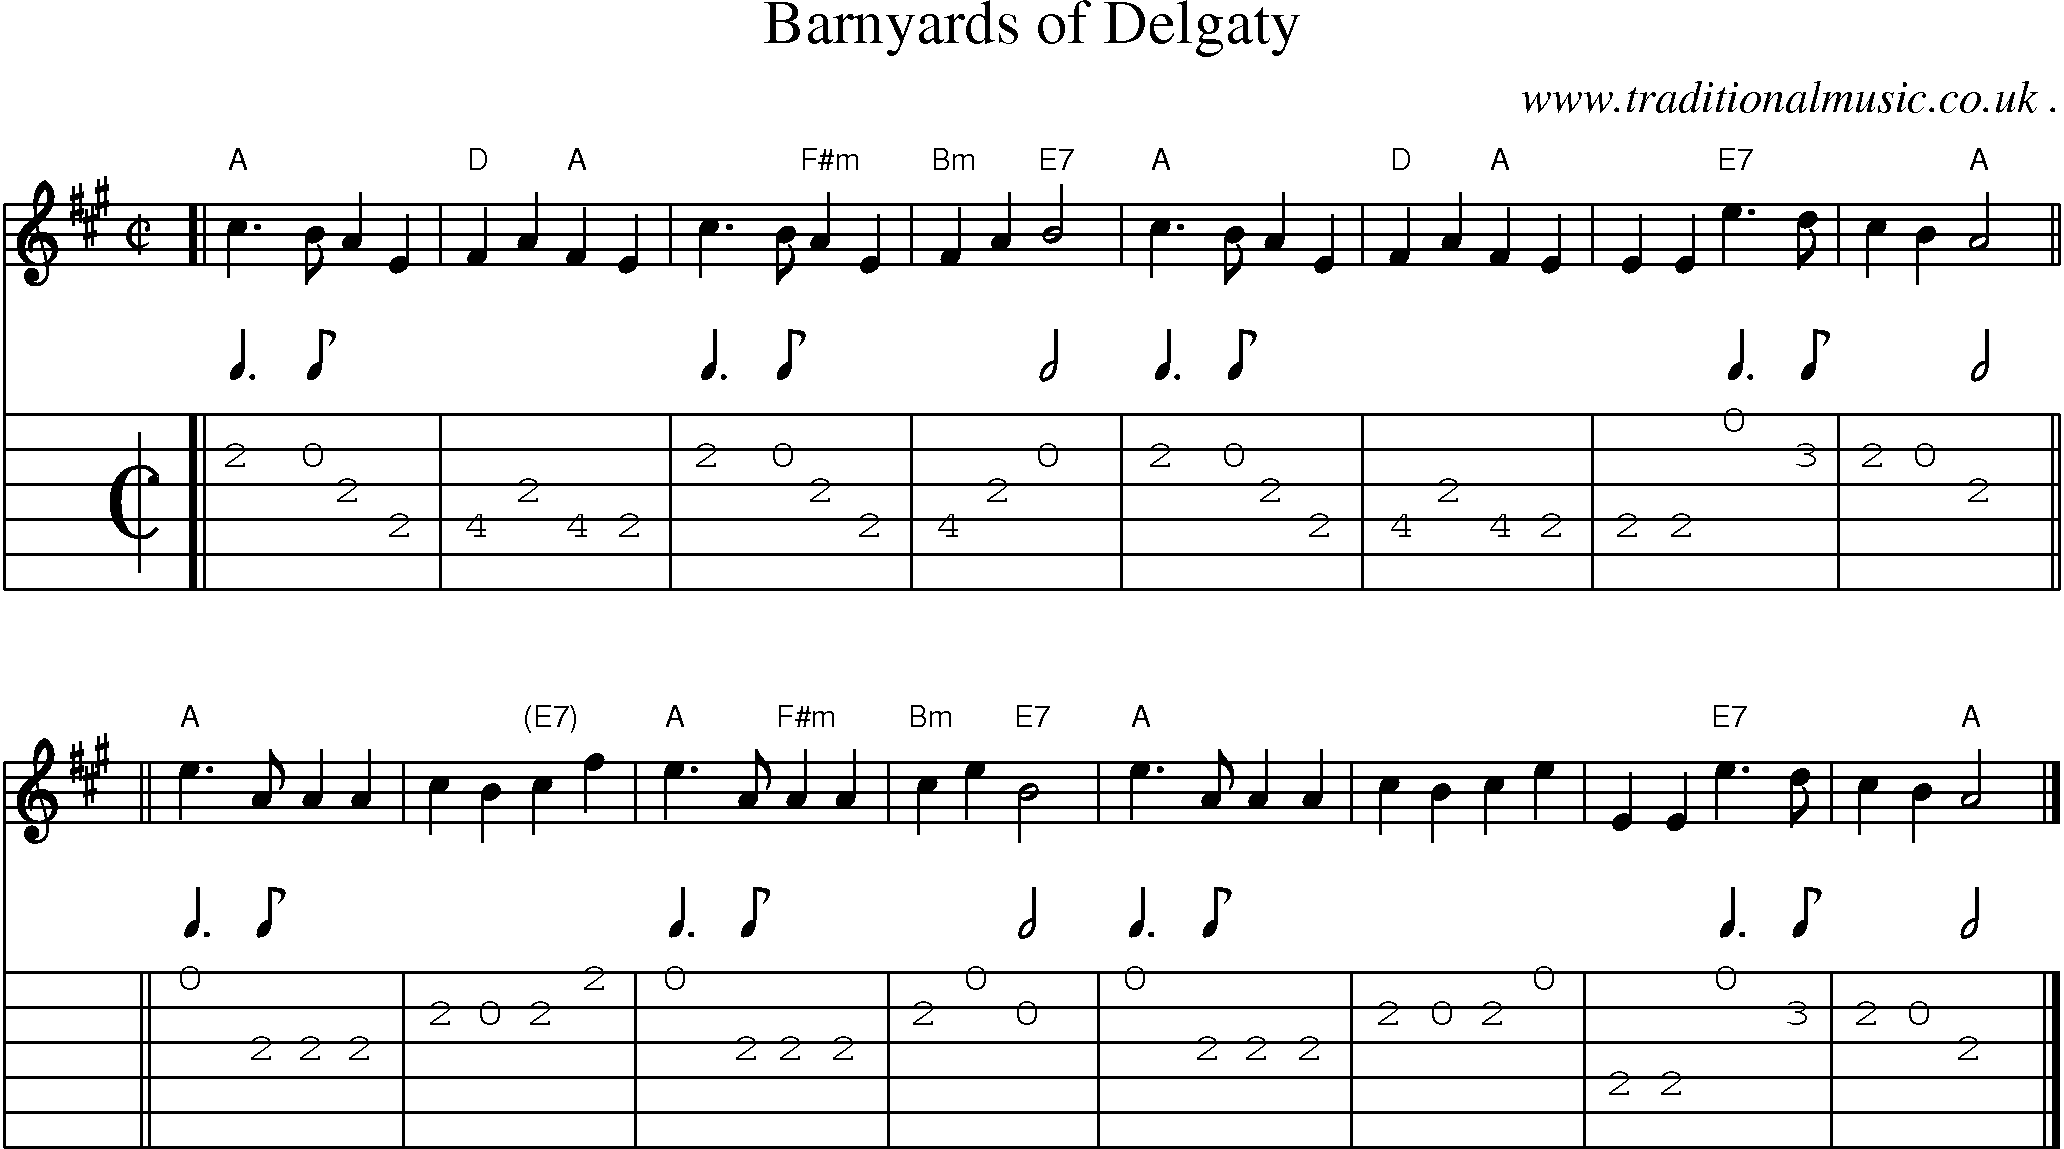 Sheet-music  score, Chords and Guitar Tabs for Barnyards Of Delgaty